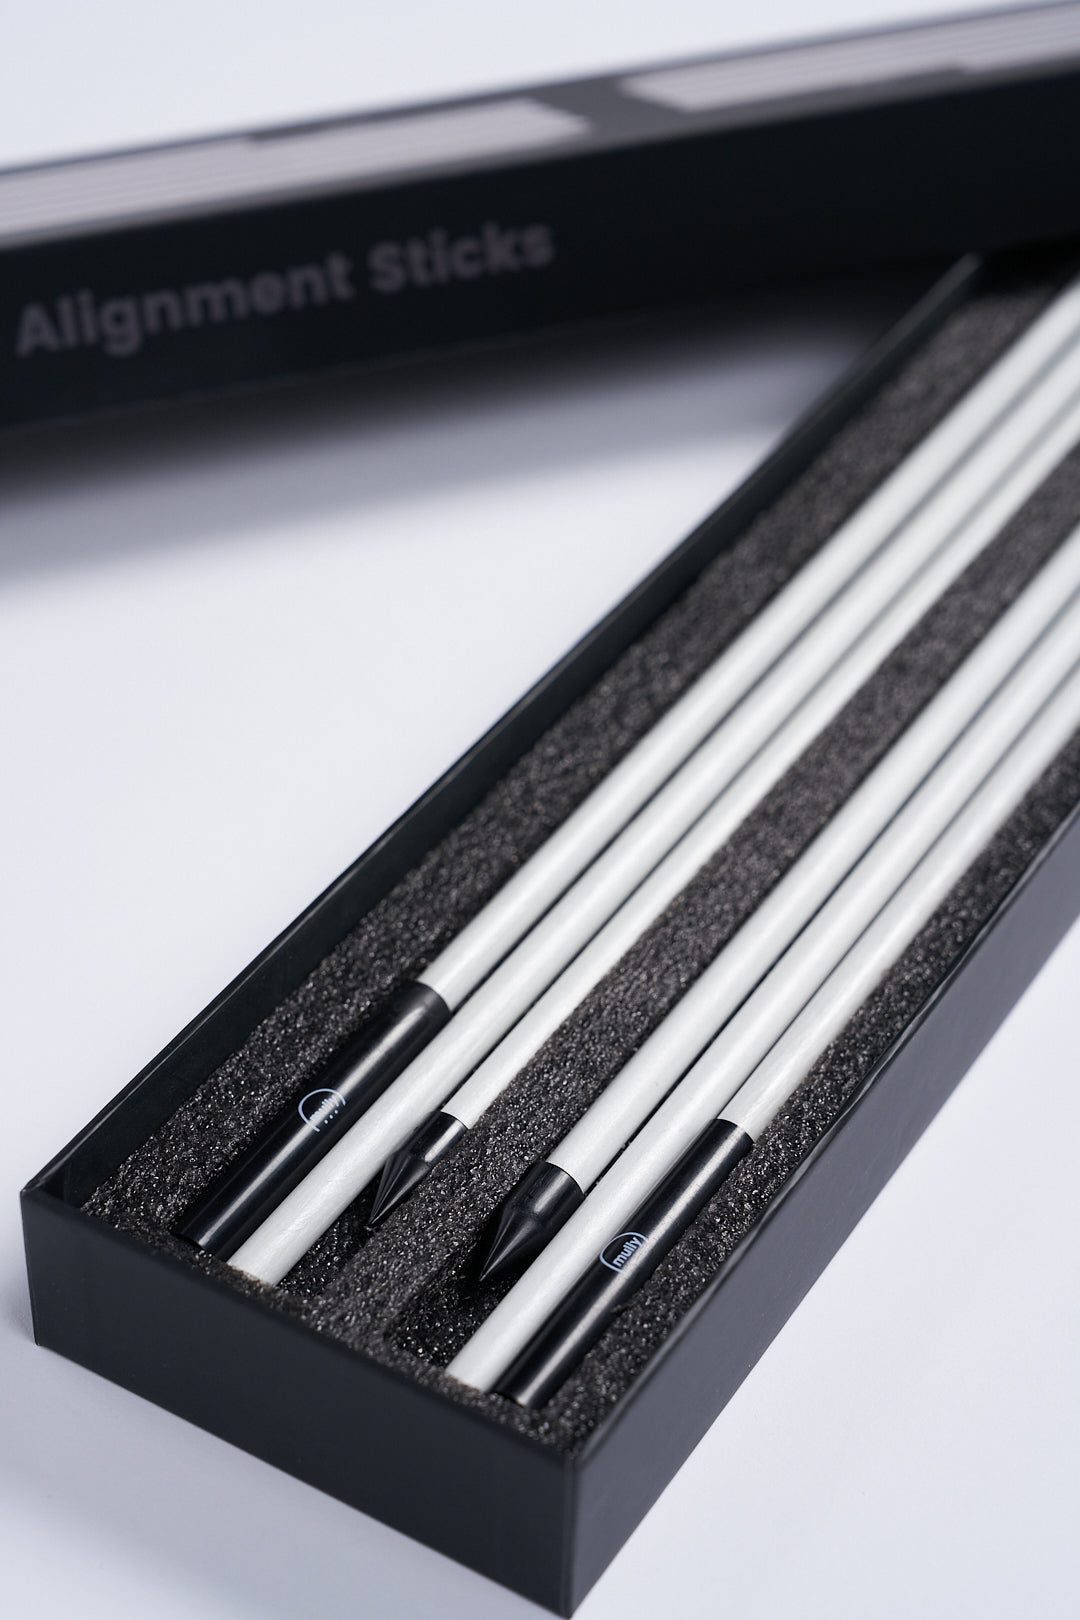 Mully Collapsible Alignment Sticks